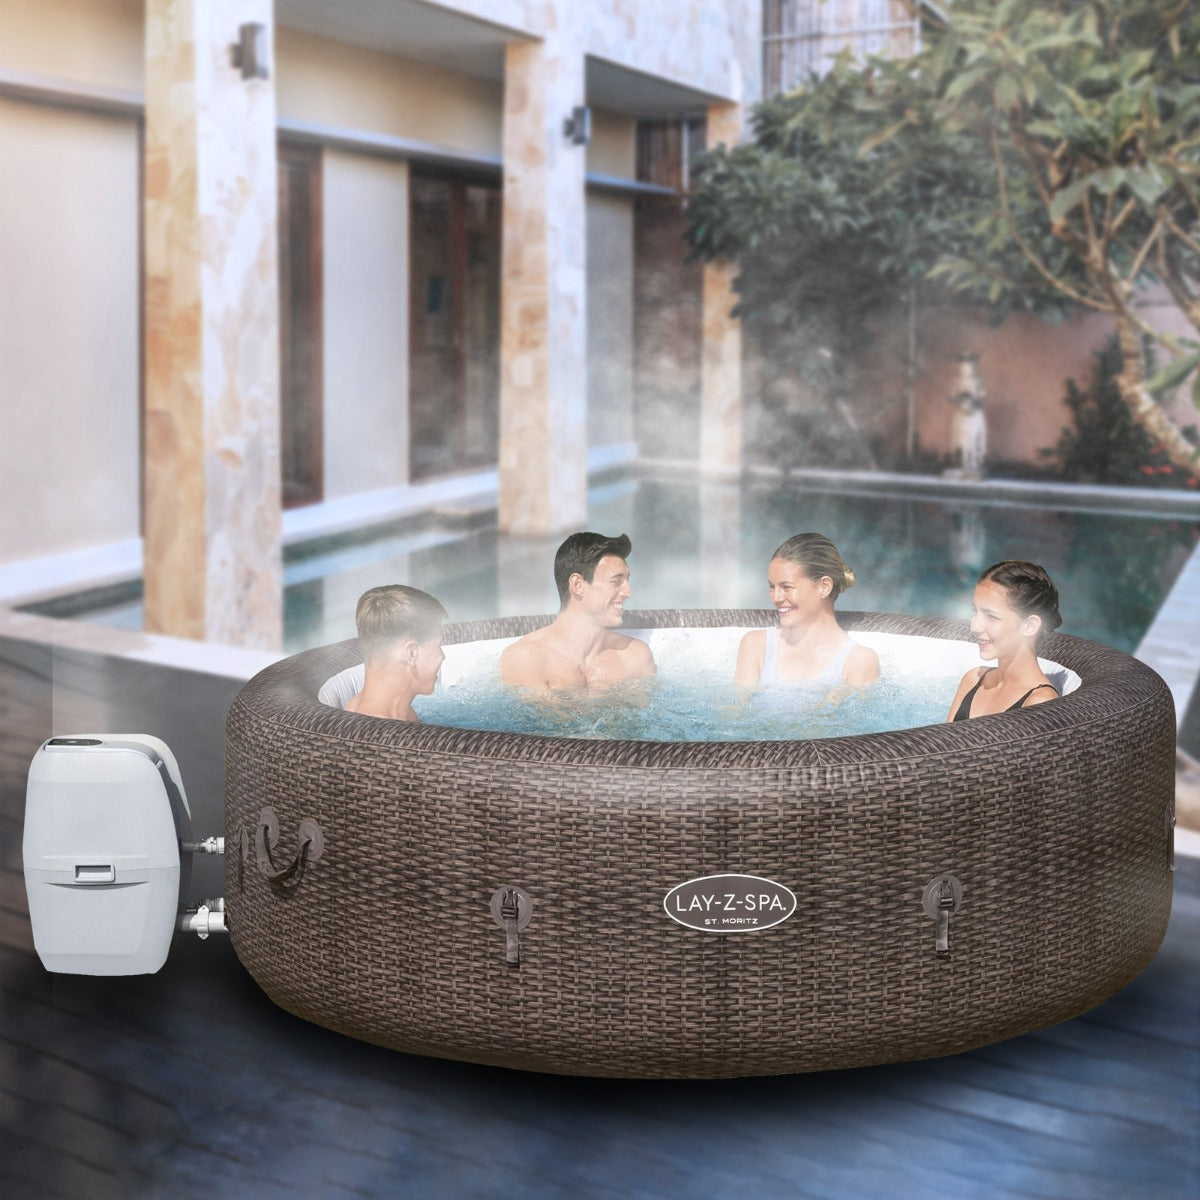 Gigantic! Bestway Tub Heated Outbax | St. Moritz Spa Hot Z Lay